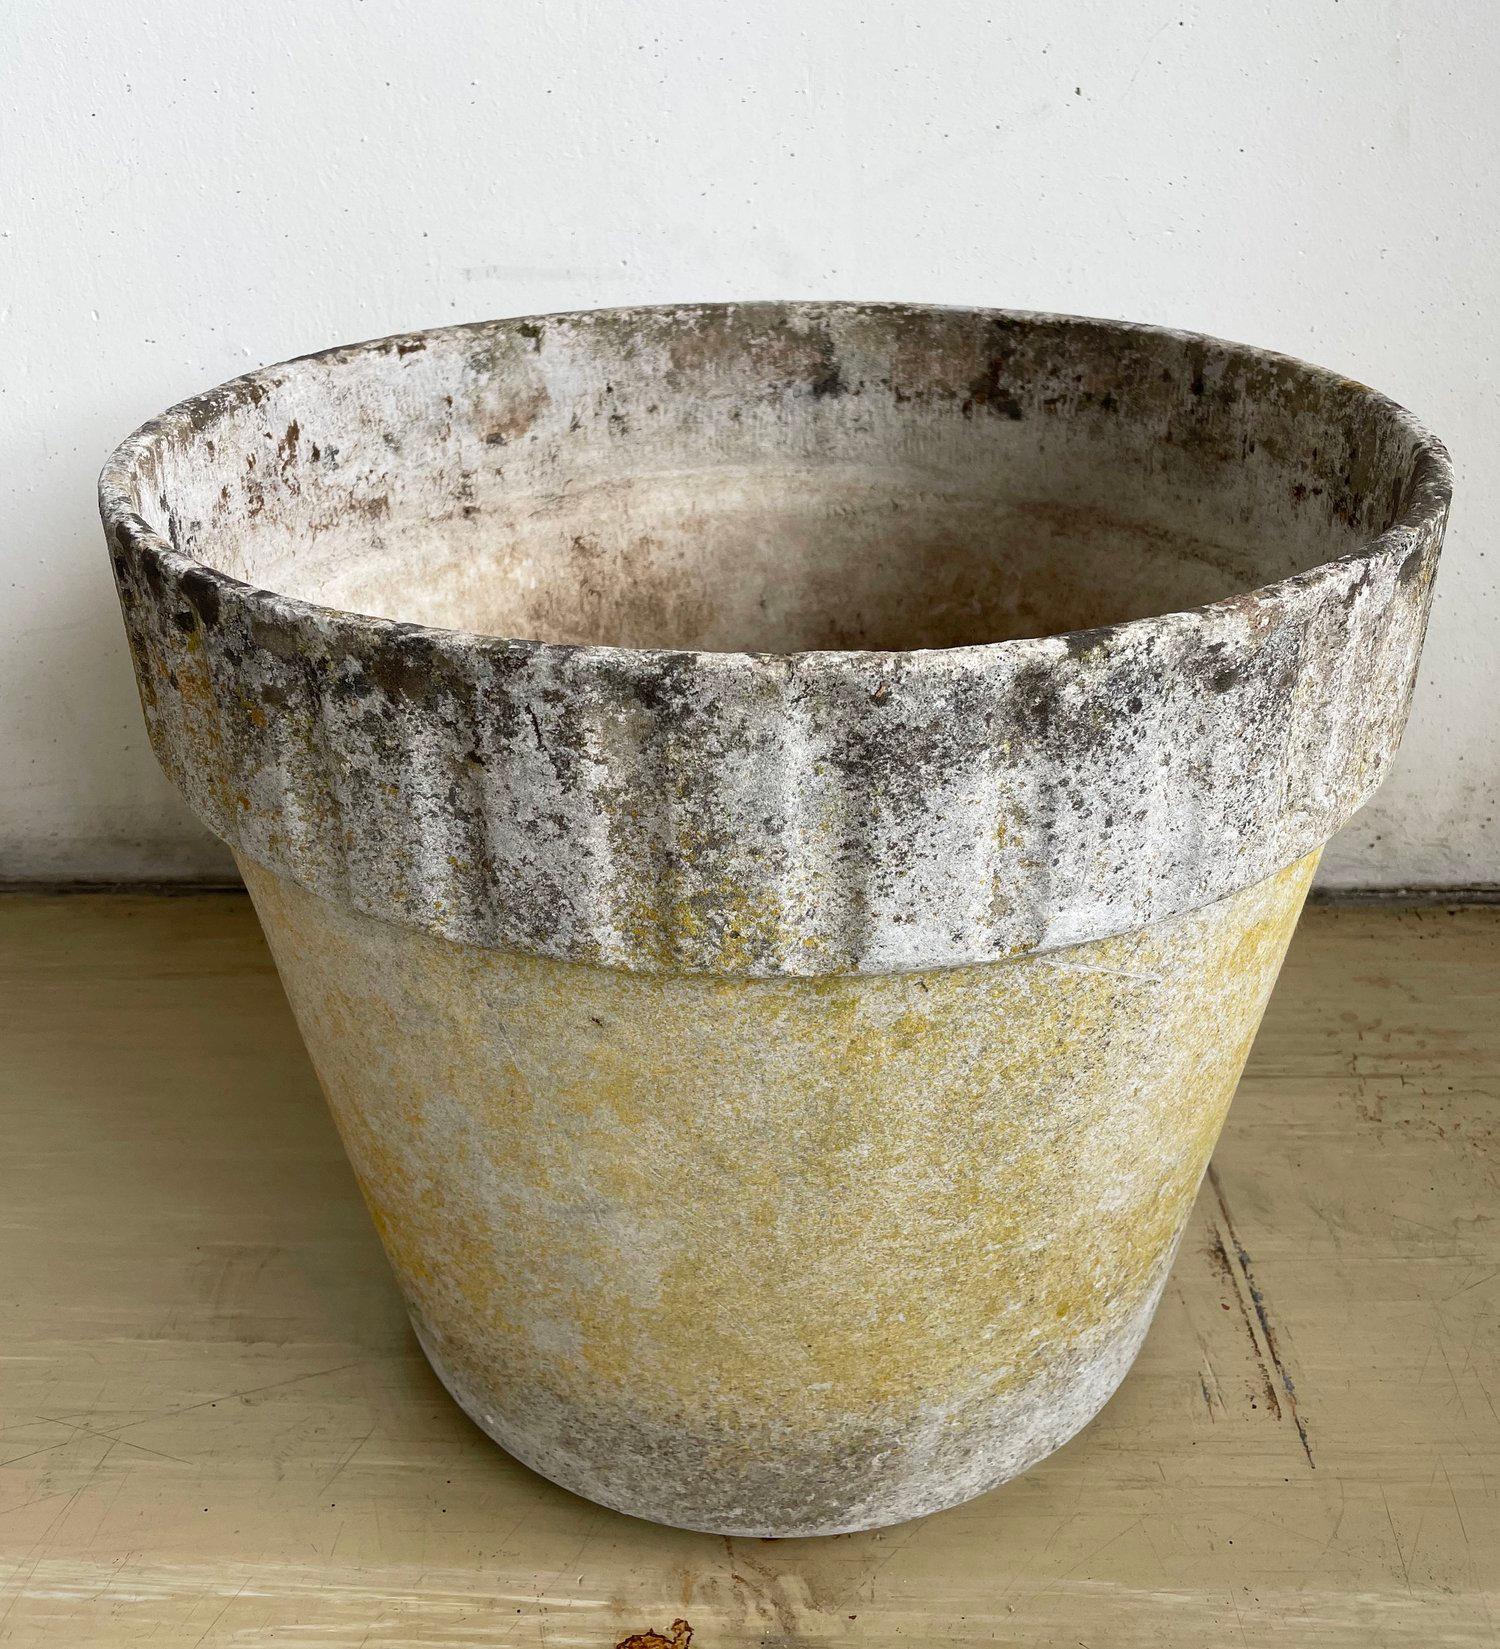 Monumental concrete flower pot by Swiss designer, Willy Guhl. Solid concrete made in Switzerland 1960 - 1970. Produced by Eternit AG.  
Tapered structure with a ribbed upper section with factory drilled drainage holes. In original condition with